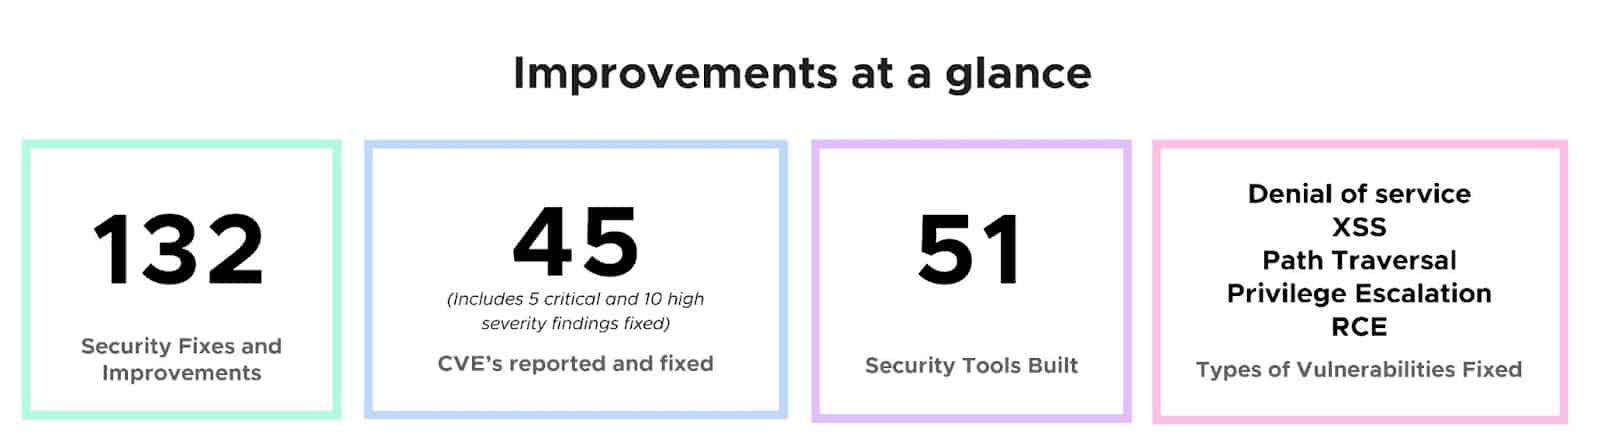 Improvements at a glance: 132 security fixes and improvements, 45 CVE's reported and fixed, 51 security tools built, denial of service XSS Path Traversal Privilege Escalation RCE